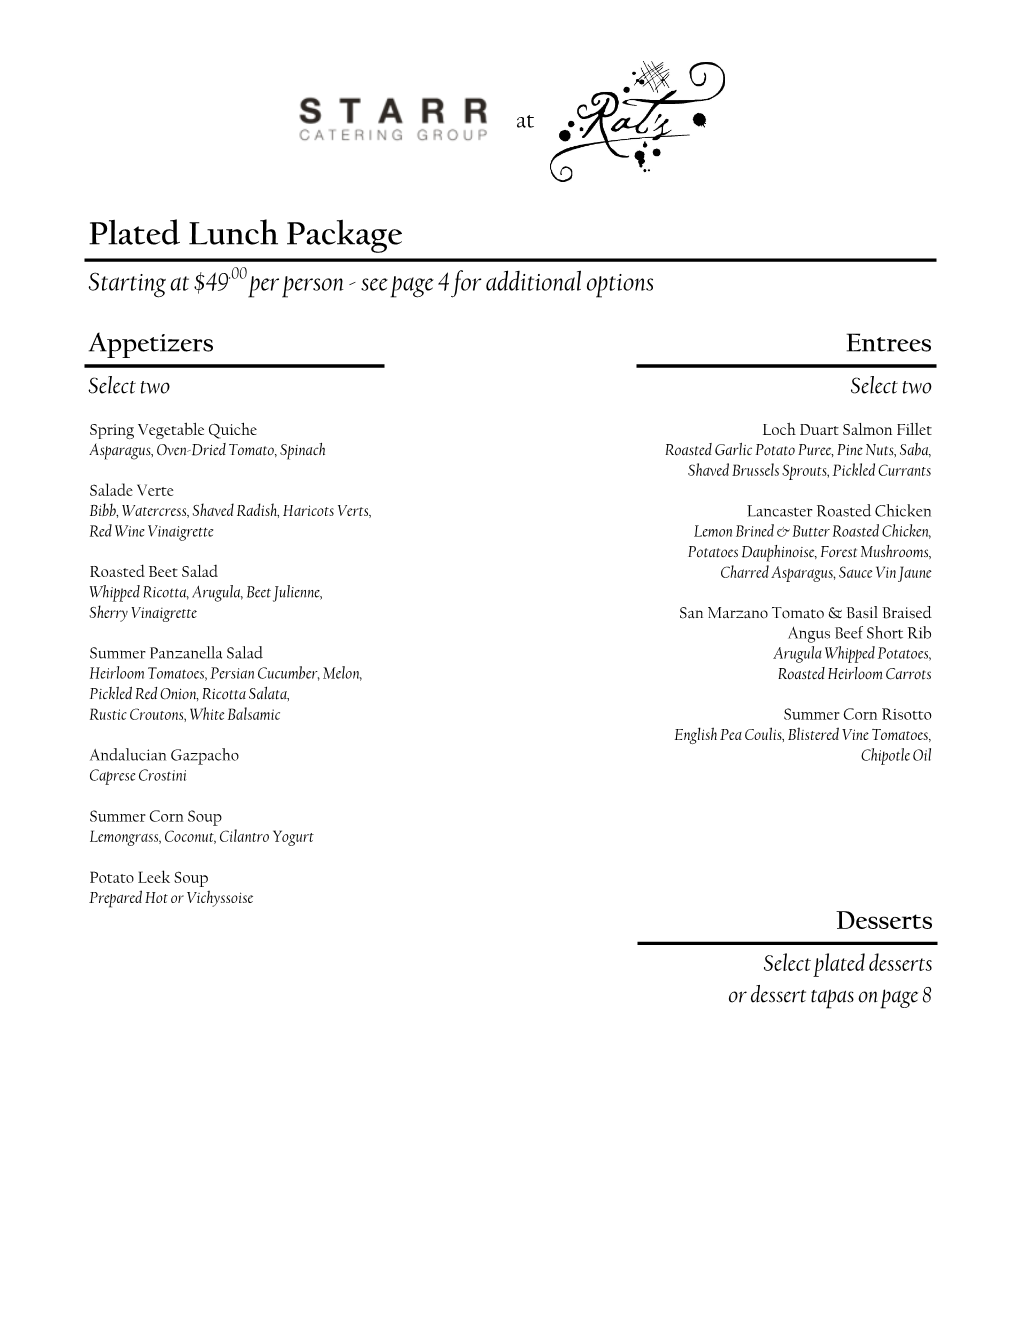 Plated Lunch Package Starting at $49.00 Per Person - See Page 4 for Additional Options